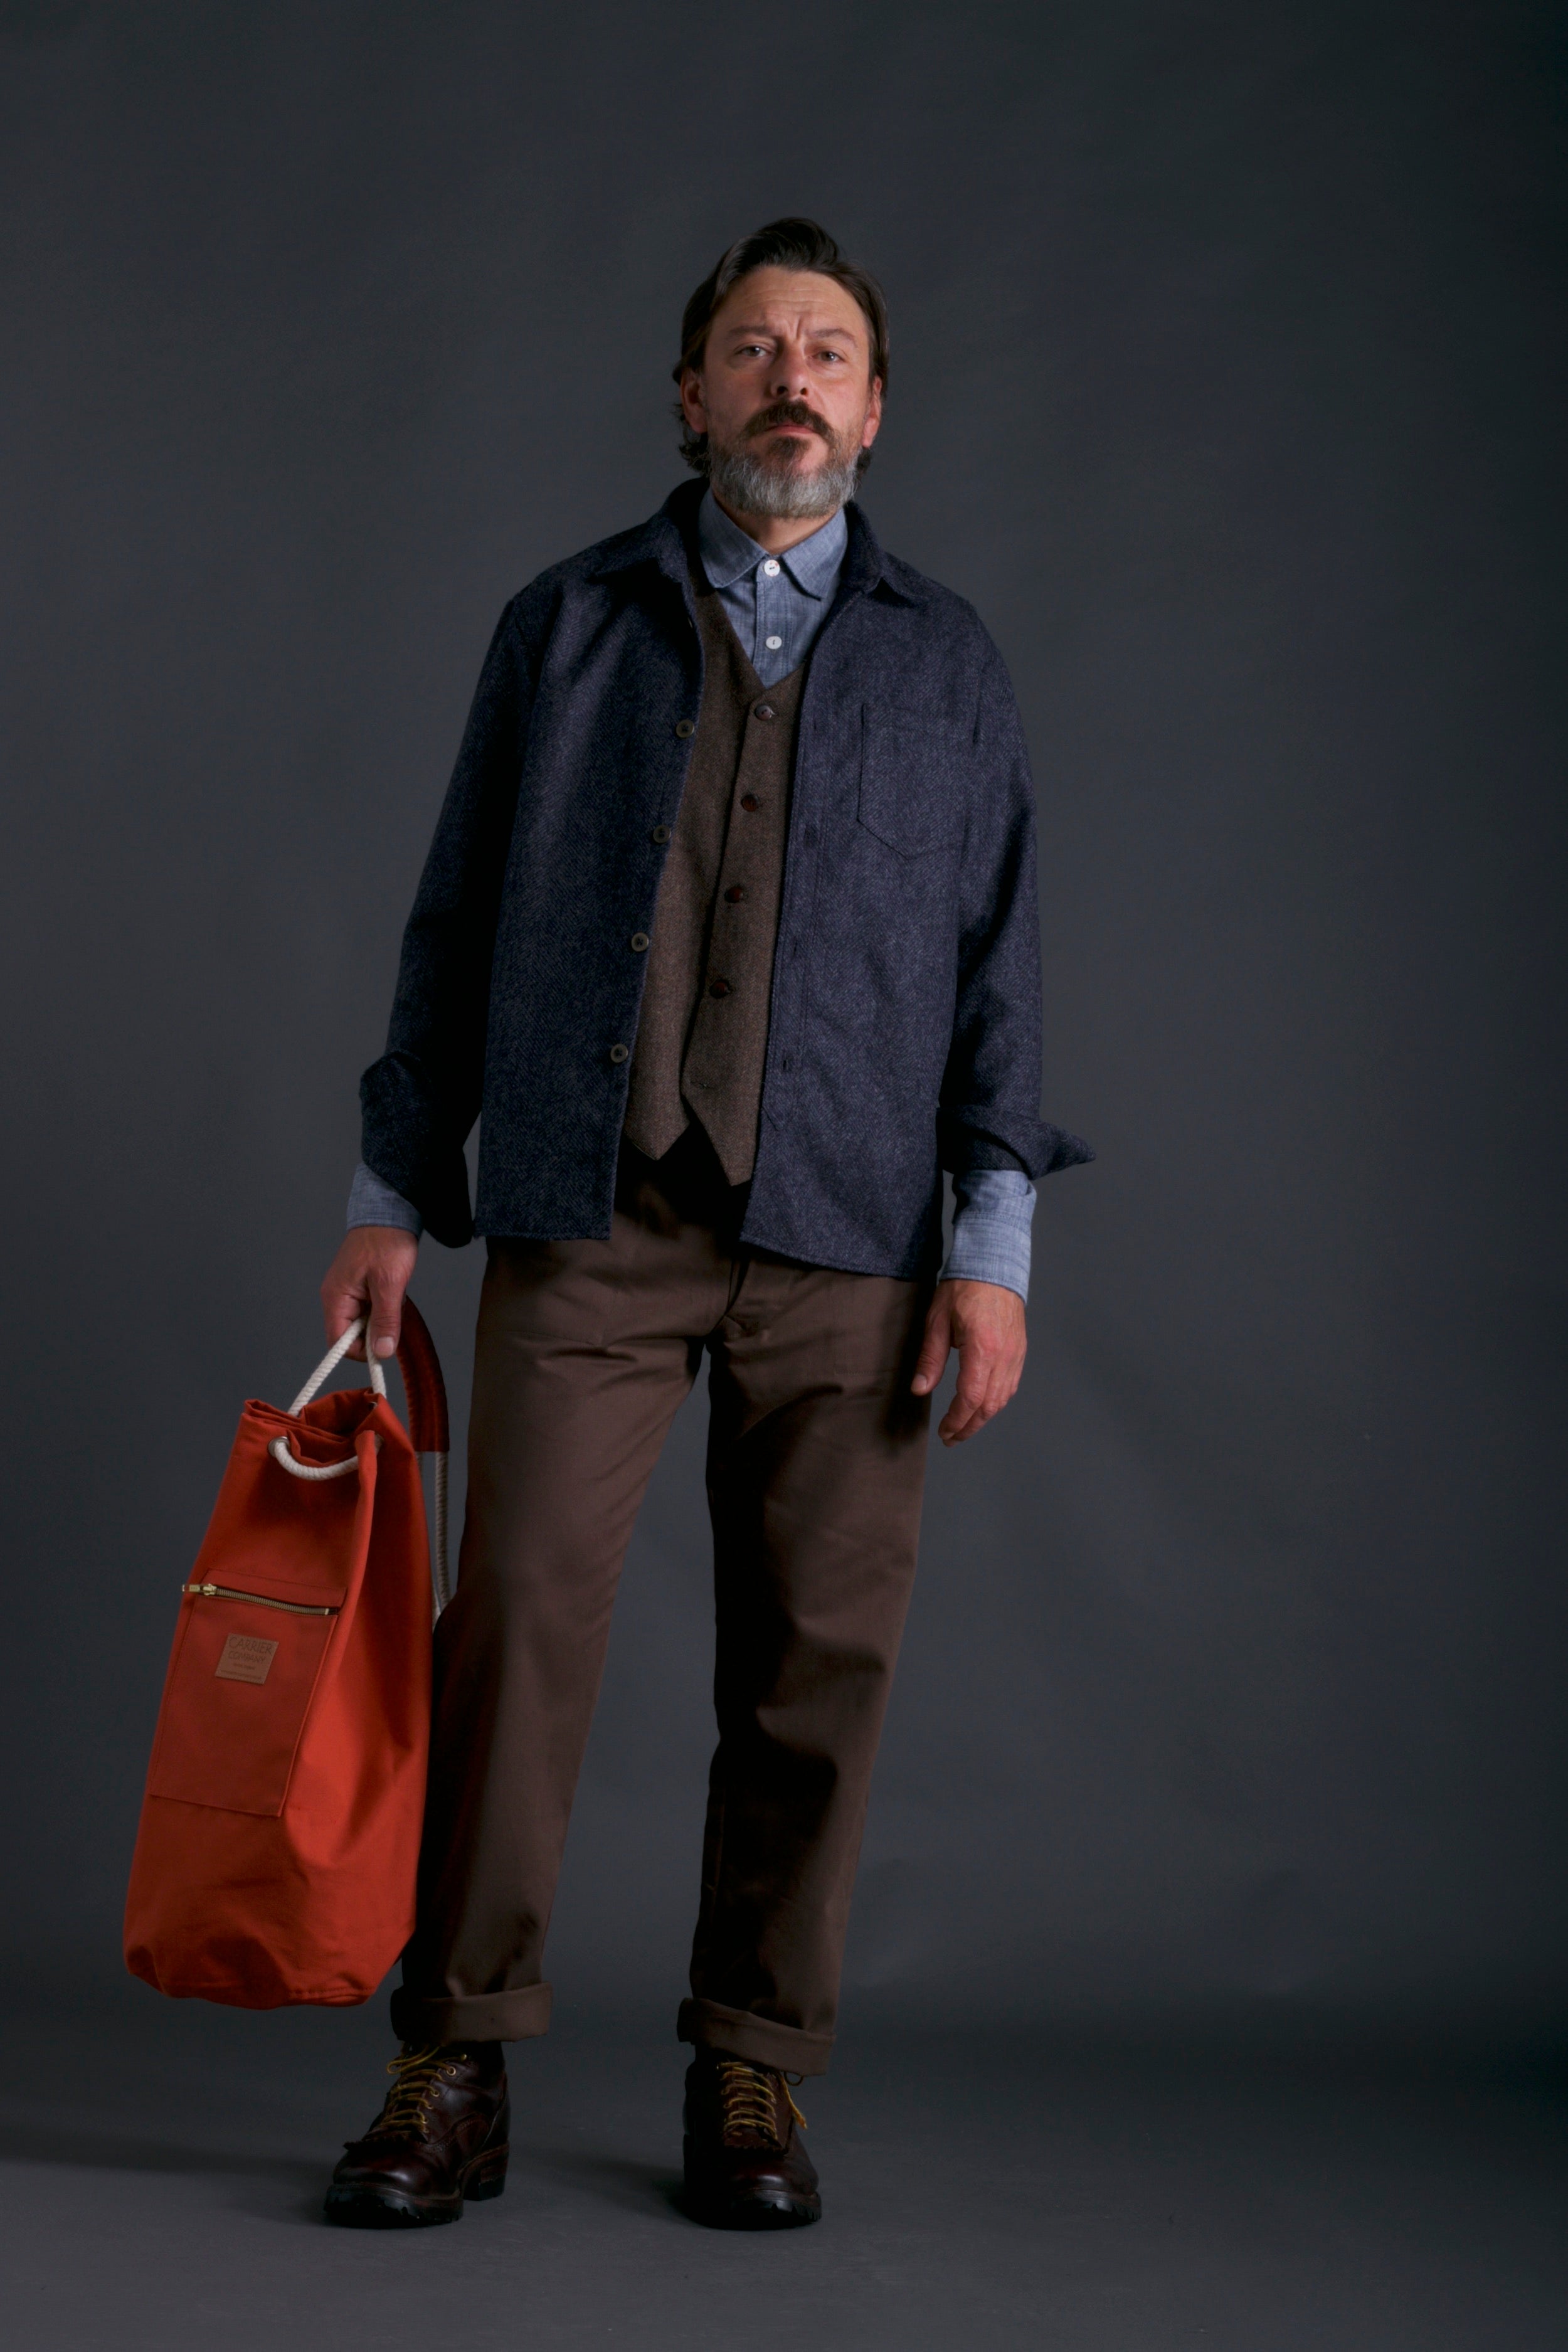 Man wears Carrier Company Wool Overshirt, Wool Waistcoat, Chambray Shirt, Work trouser in Olive and Duffel Bag in Orange